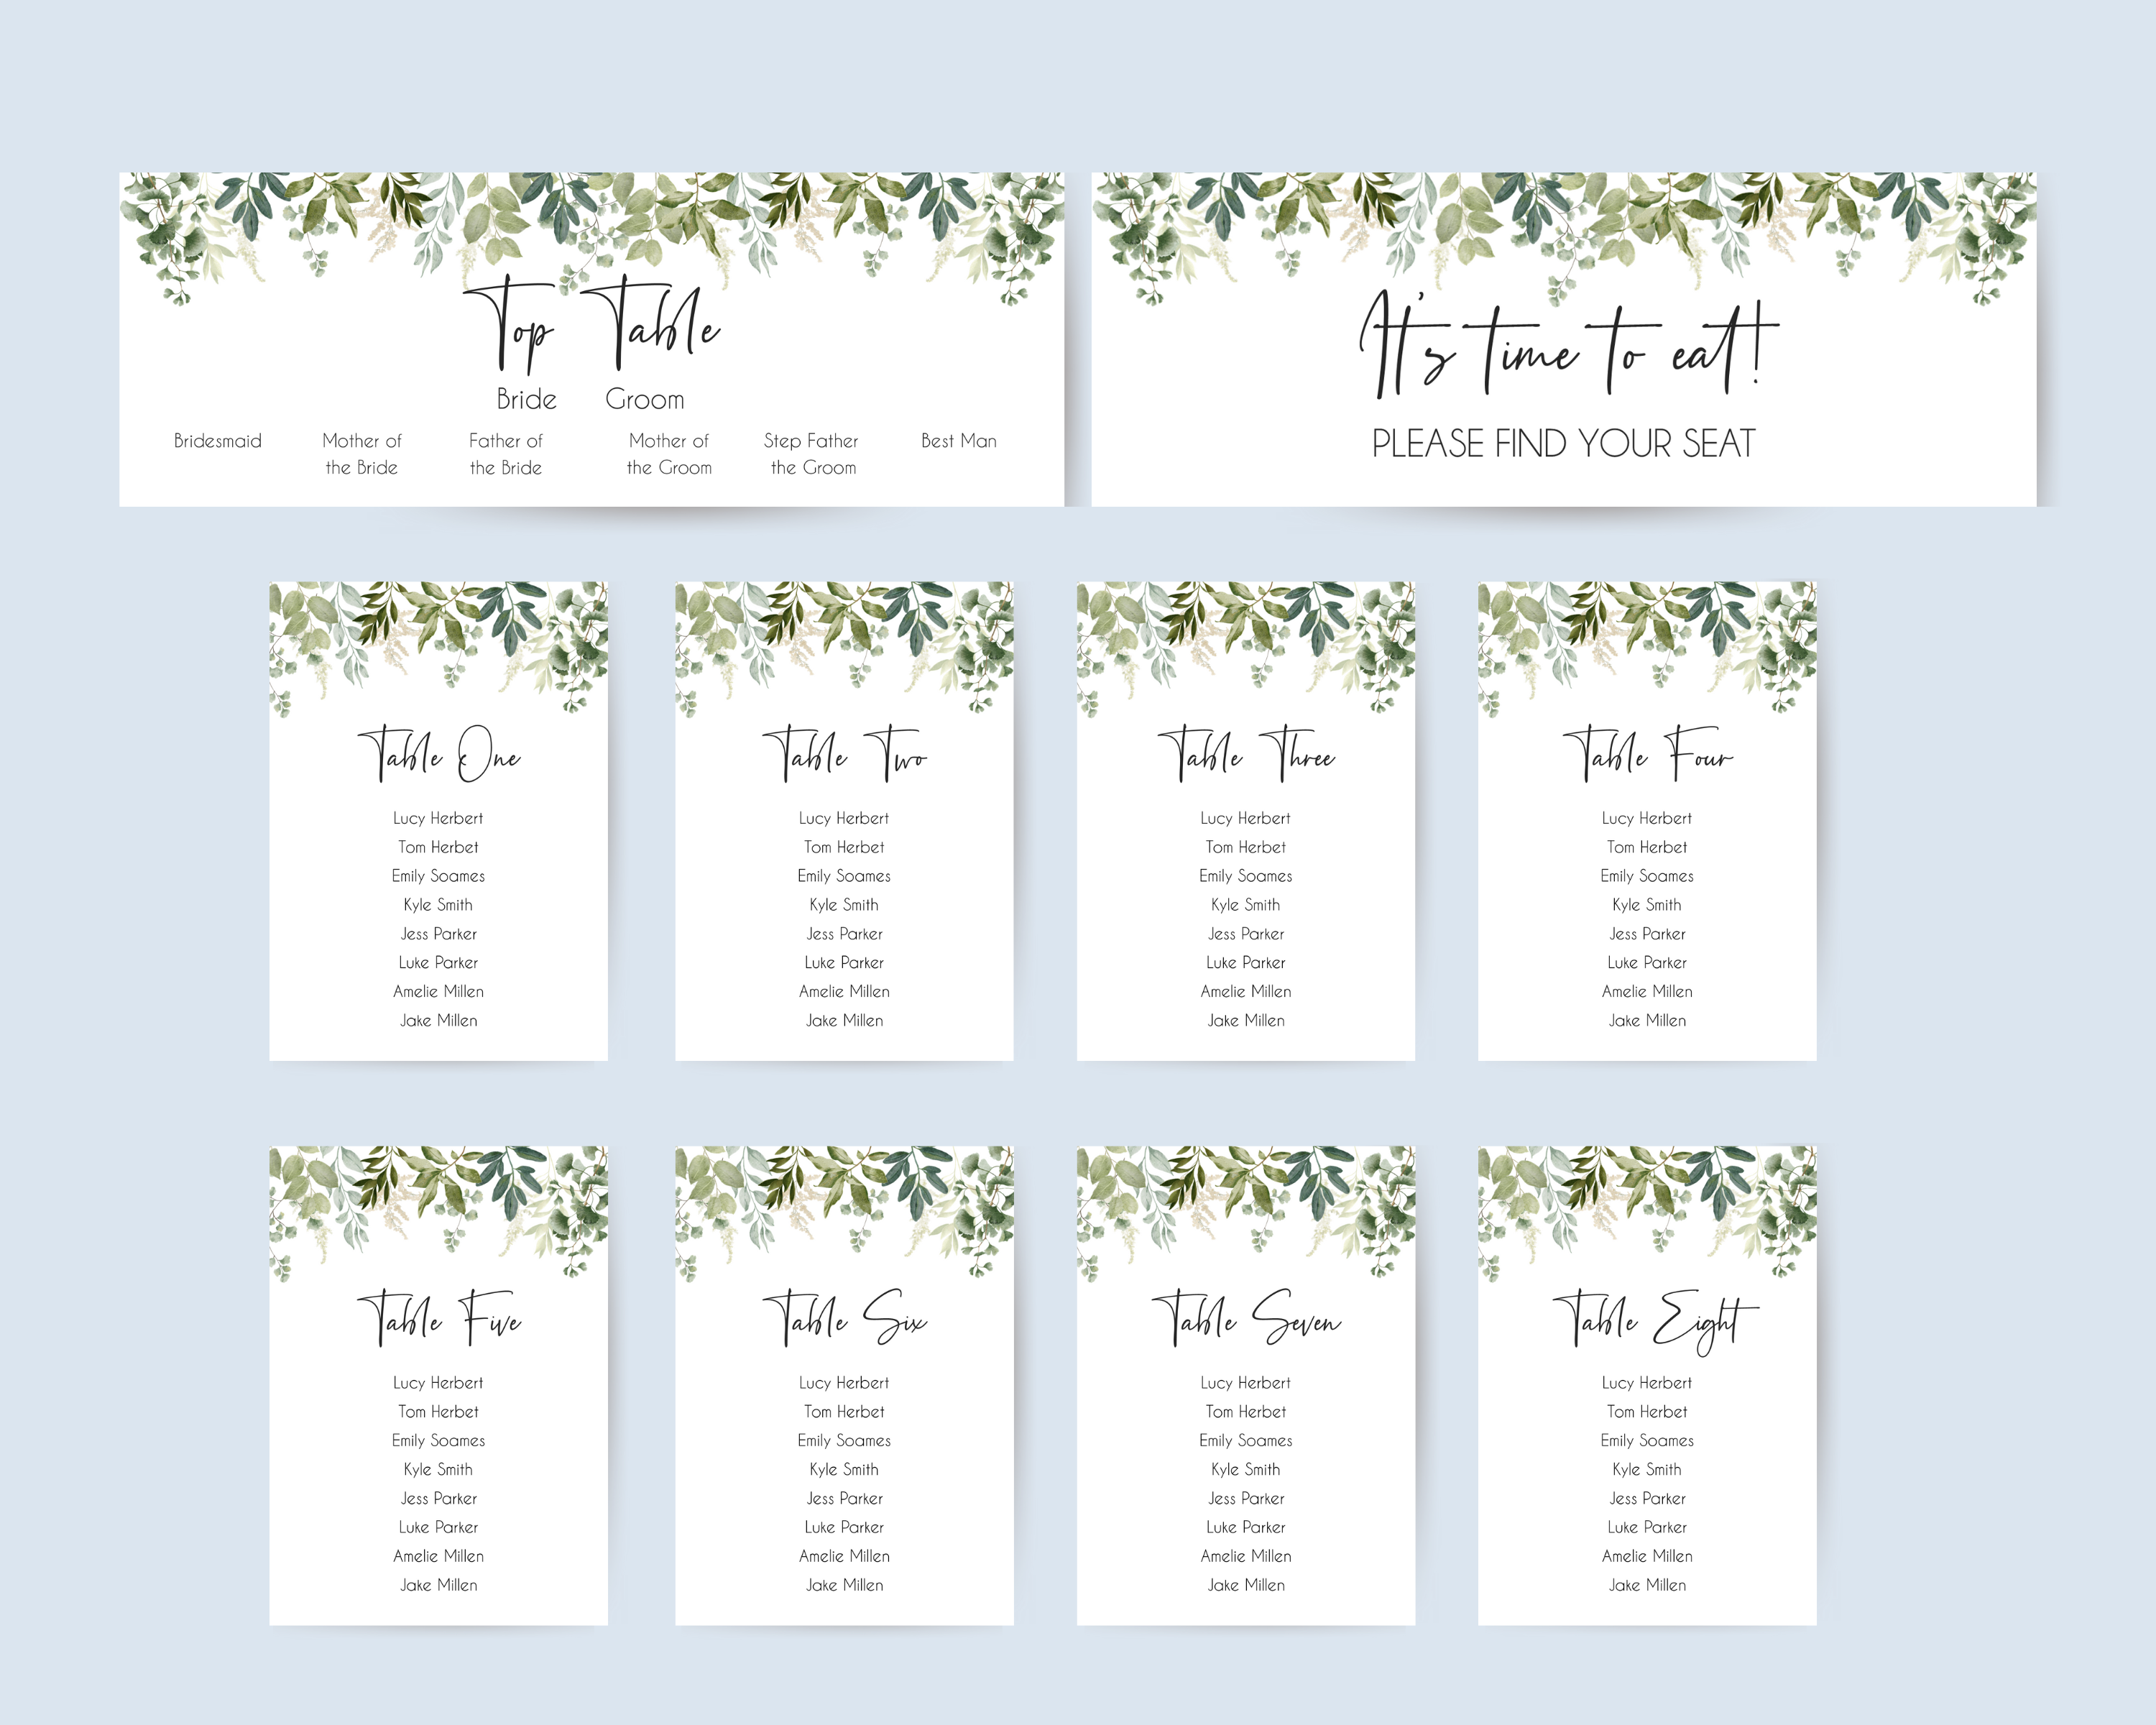 A set of Poppleberry greenery & eucalyptus wedding table plan cards, including 'find your seat', 'top table' and 'A6 table' cards, on a plain background.